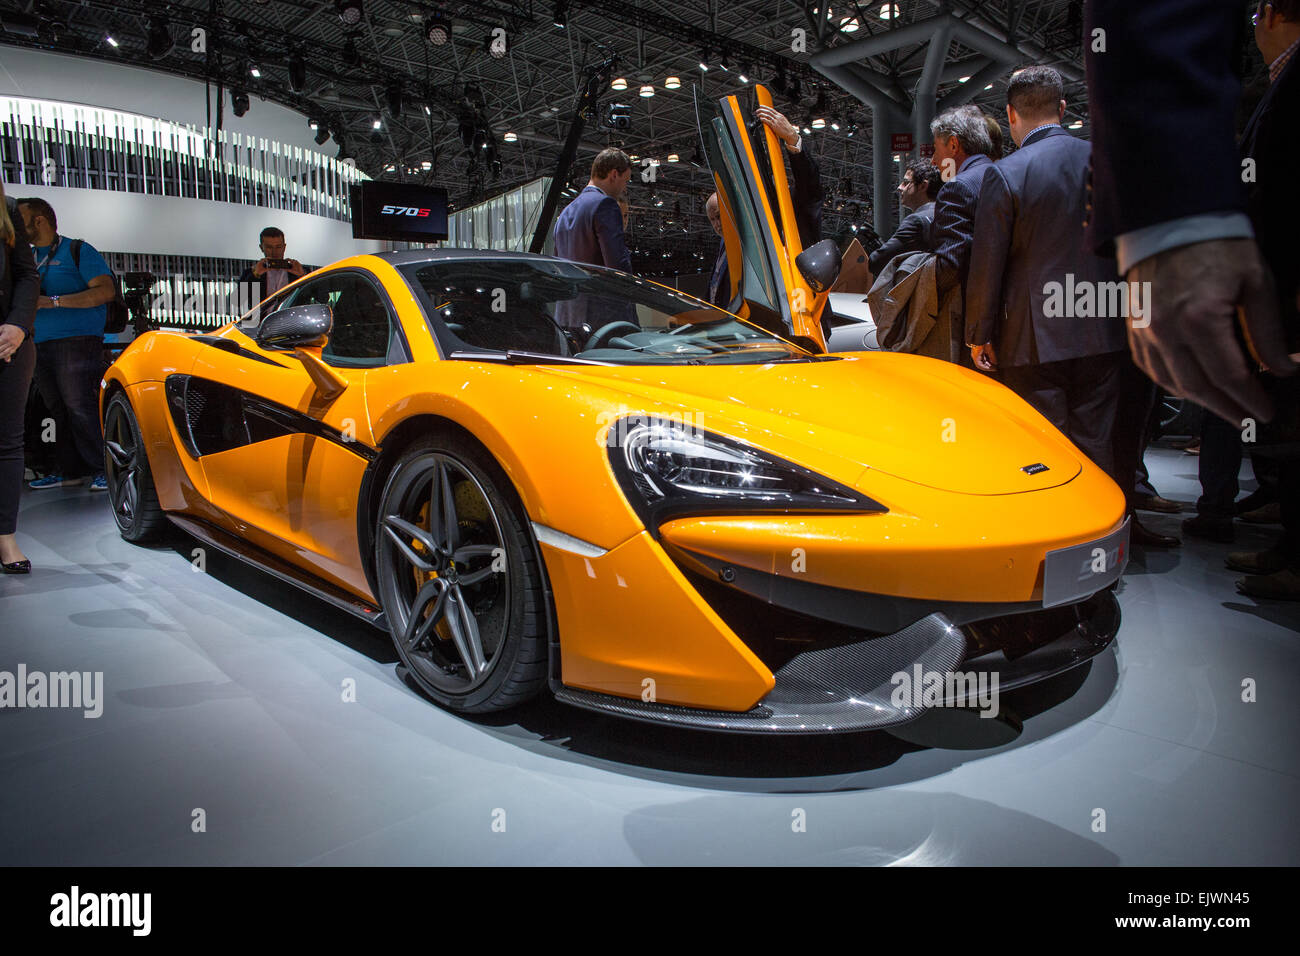 New York, NY - 1 April 2015. British carmaker McLaren unveiled its entry-level 570S mid-engine sportscar at the New York International Auto Show. Boasting 562hp, the car seems to look to comete with the Porsche 911 S Turbo. Credit:  Ed Lefkowicz/Alamy Live News Stock Photo